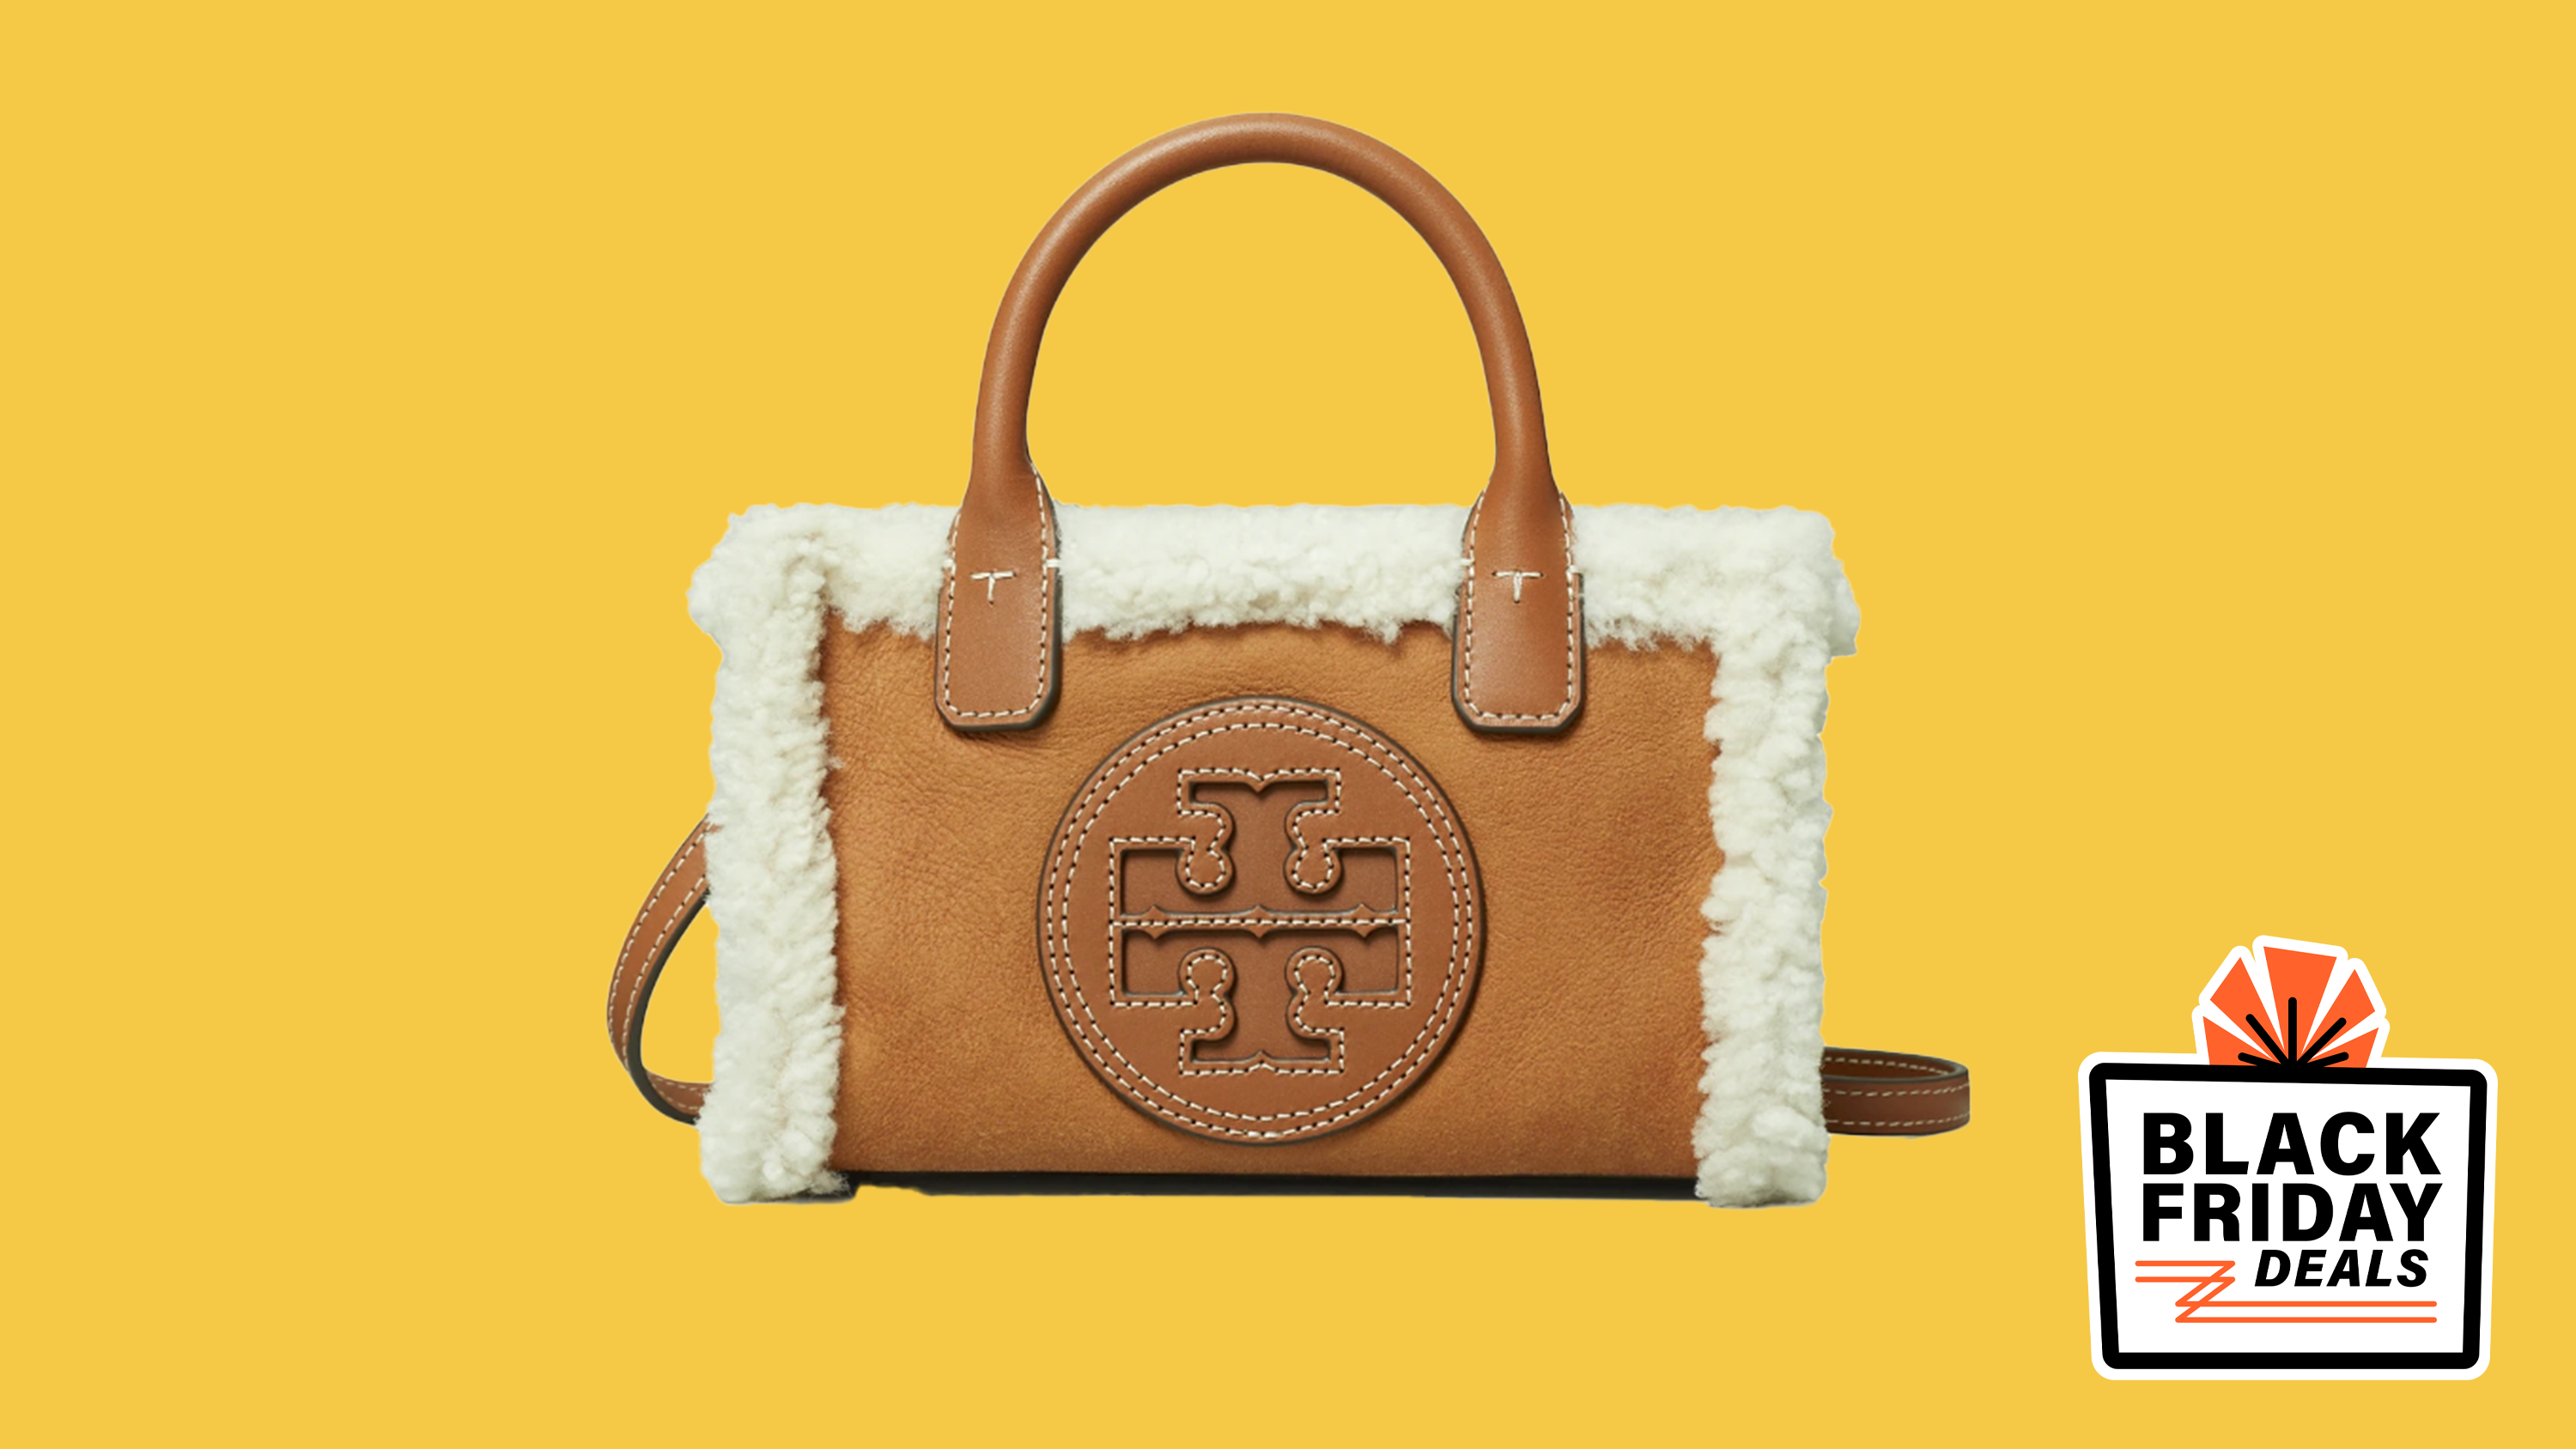 Tory Burch Black Friday sale: Up to 60% off purses, watches and shoes